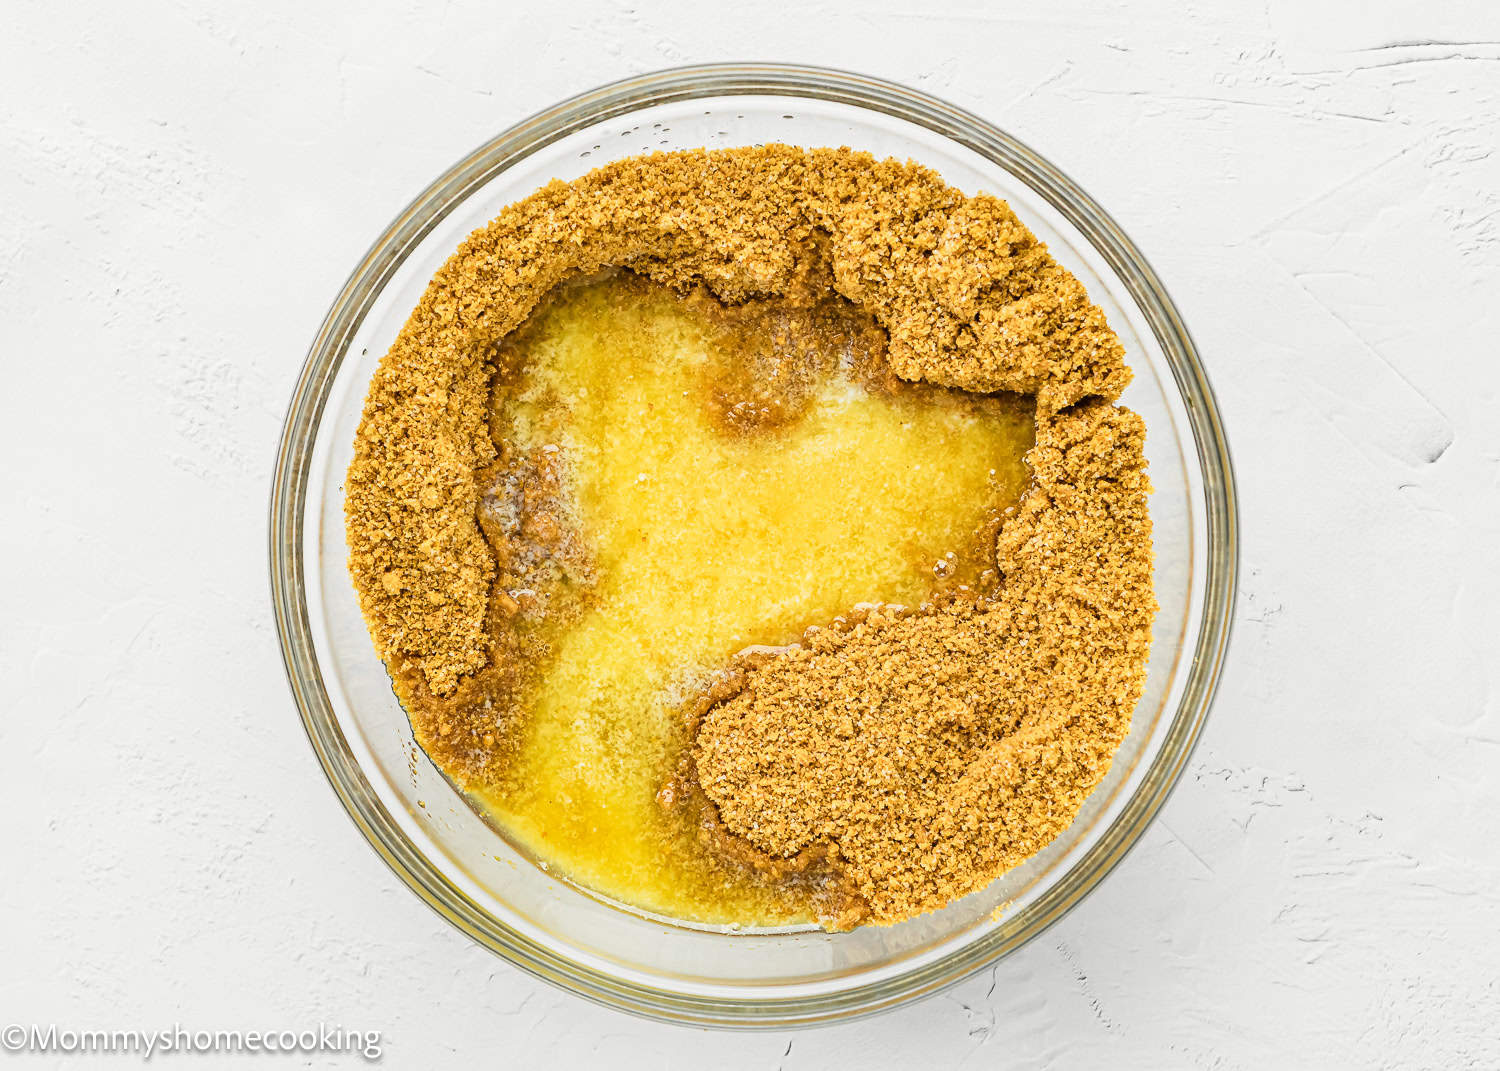 graham cracker crumbs, sugar and melted butter in a bowl.